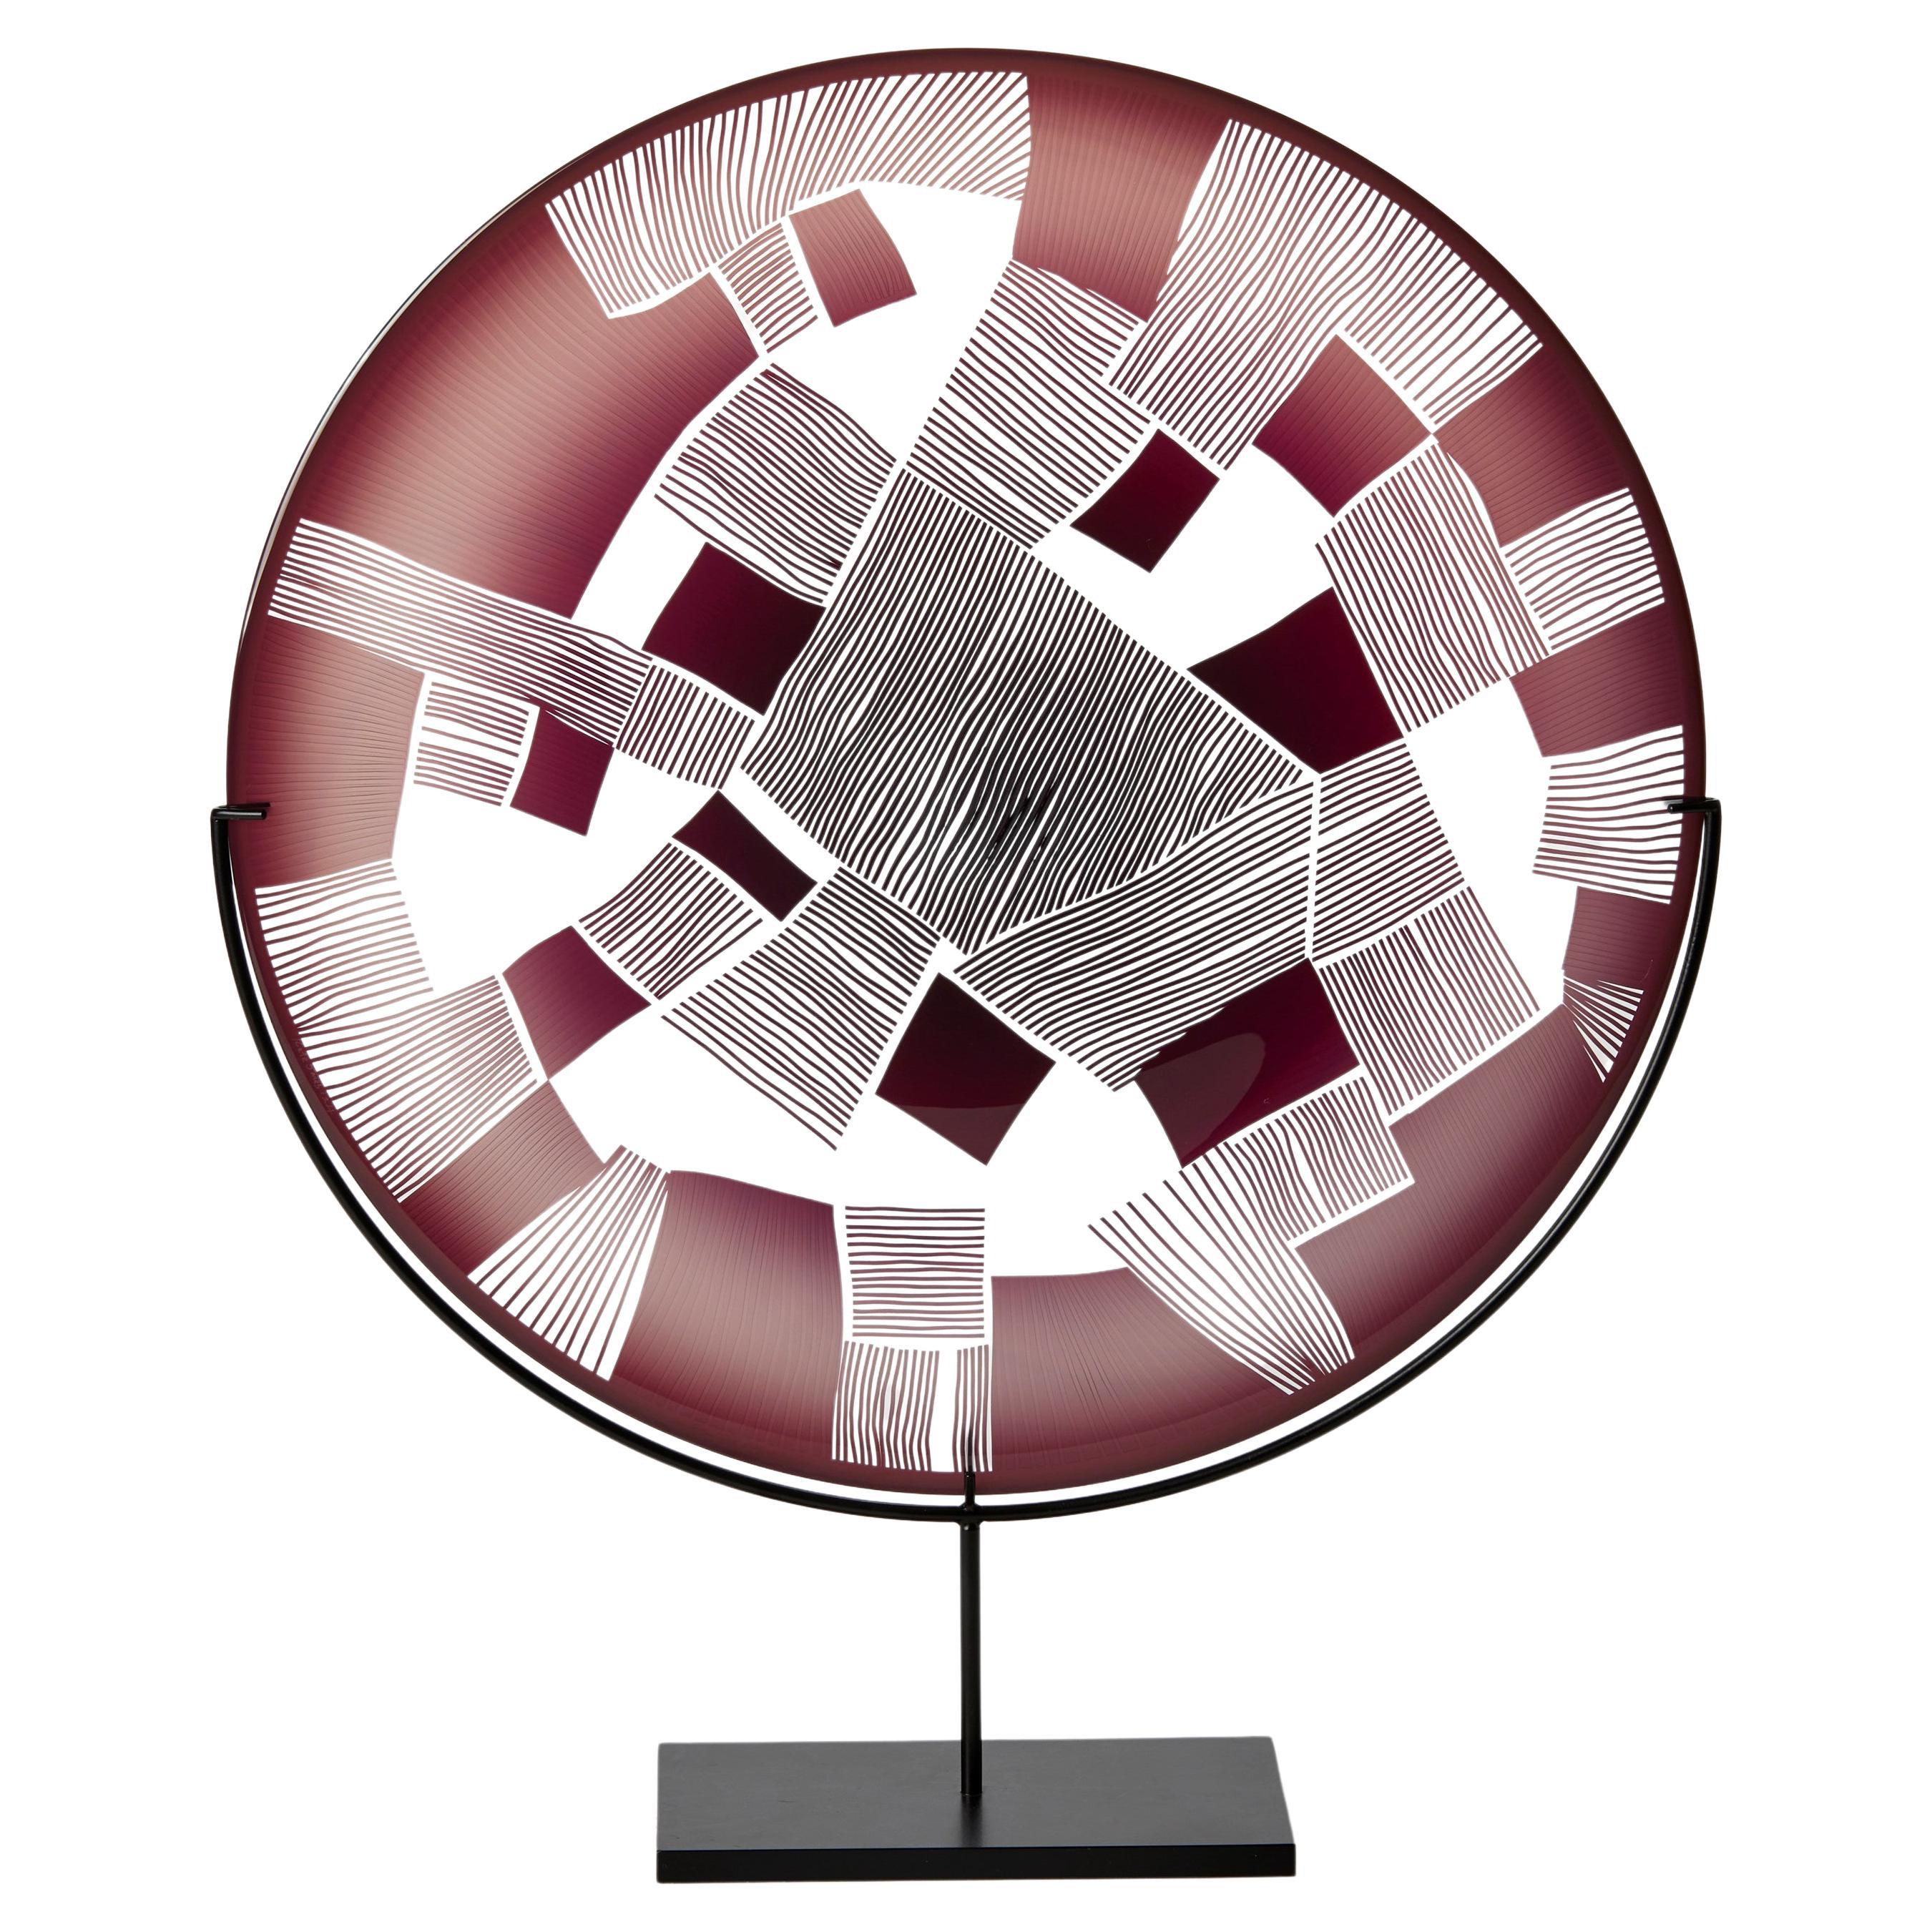 Abstracted Land Ruby Red, an oxblood red & clear glass artwork by Kate Jones For Sale